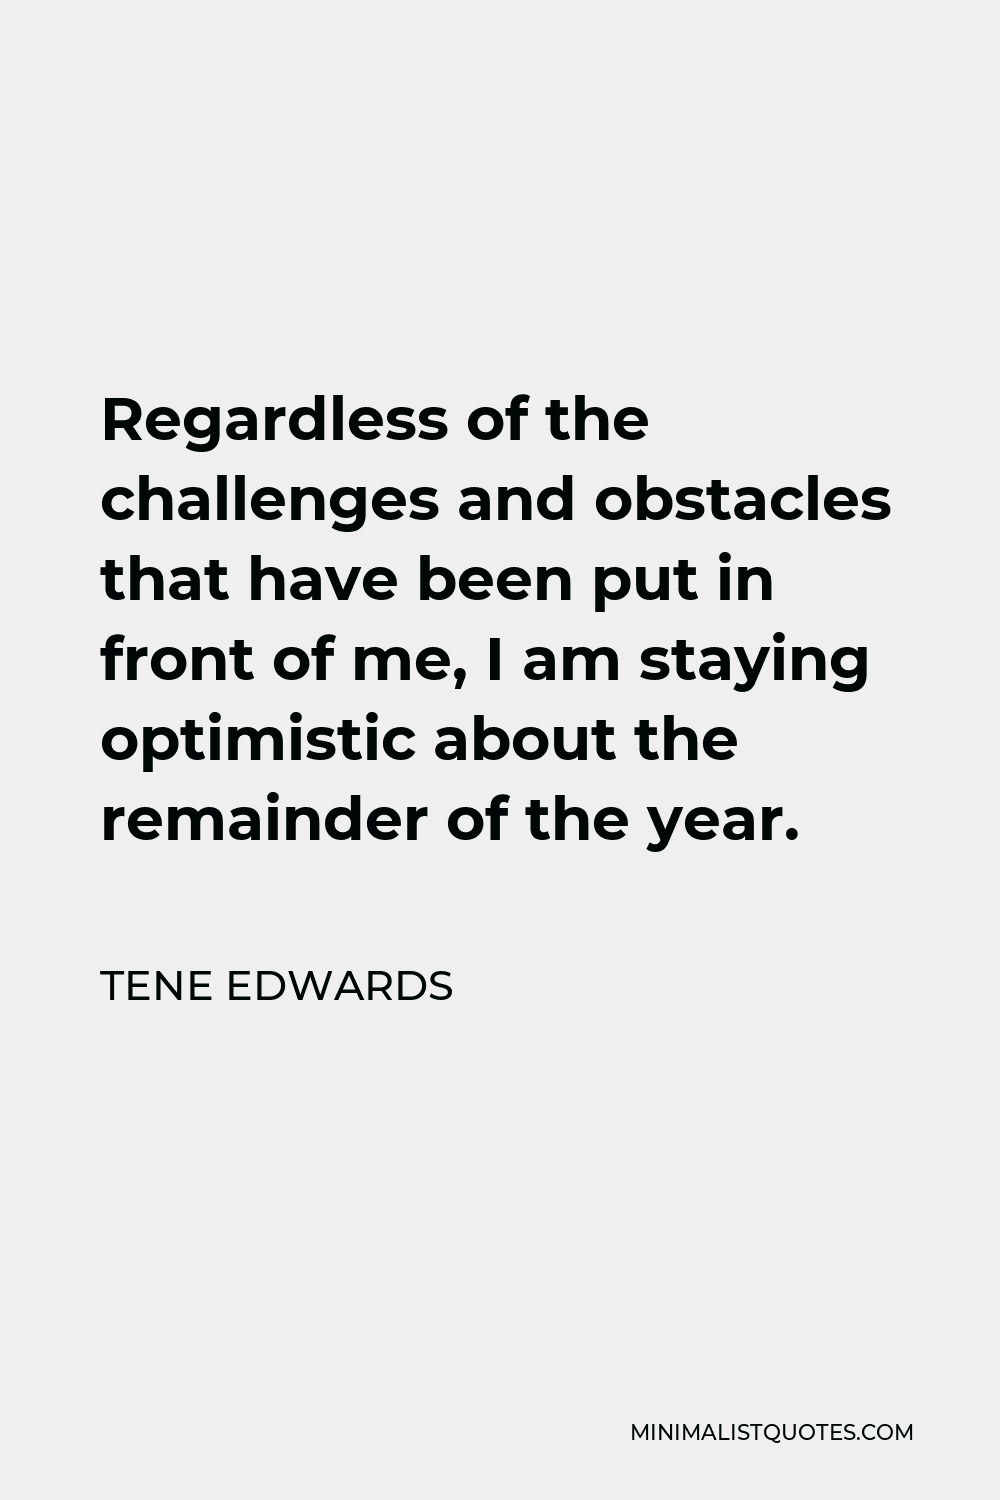 Tene Edwards Quote - Regardless of the challenges and obstacles that have been put in front of me, I am staying optimistic about the remainder of the year.